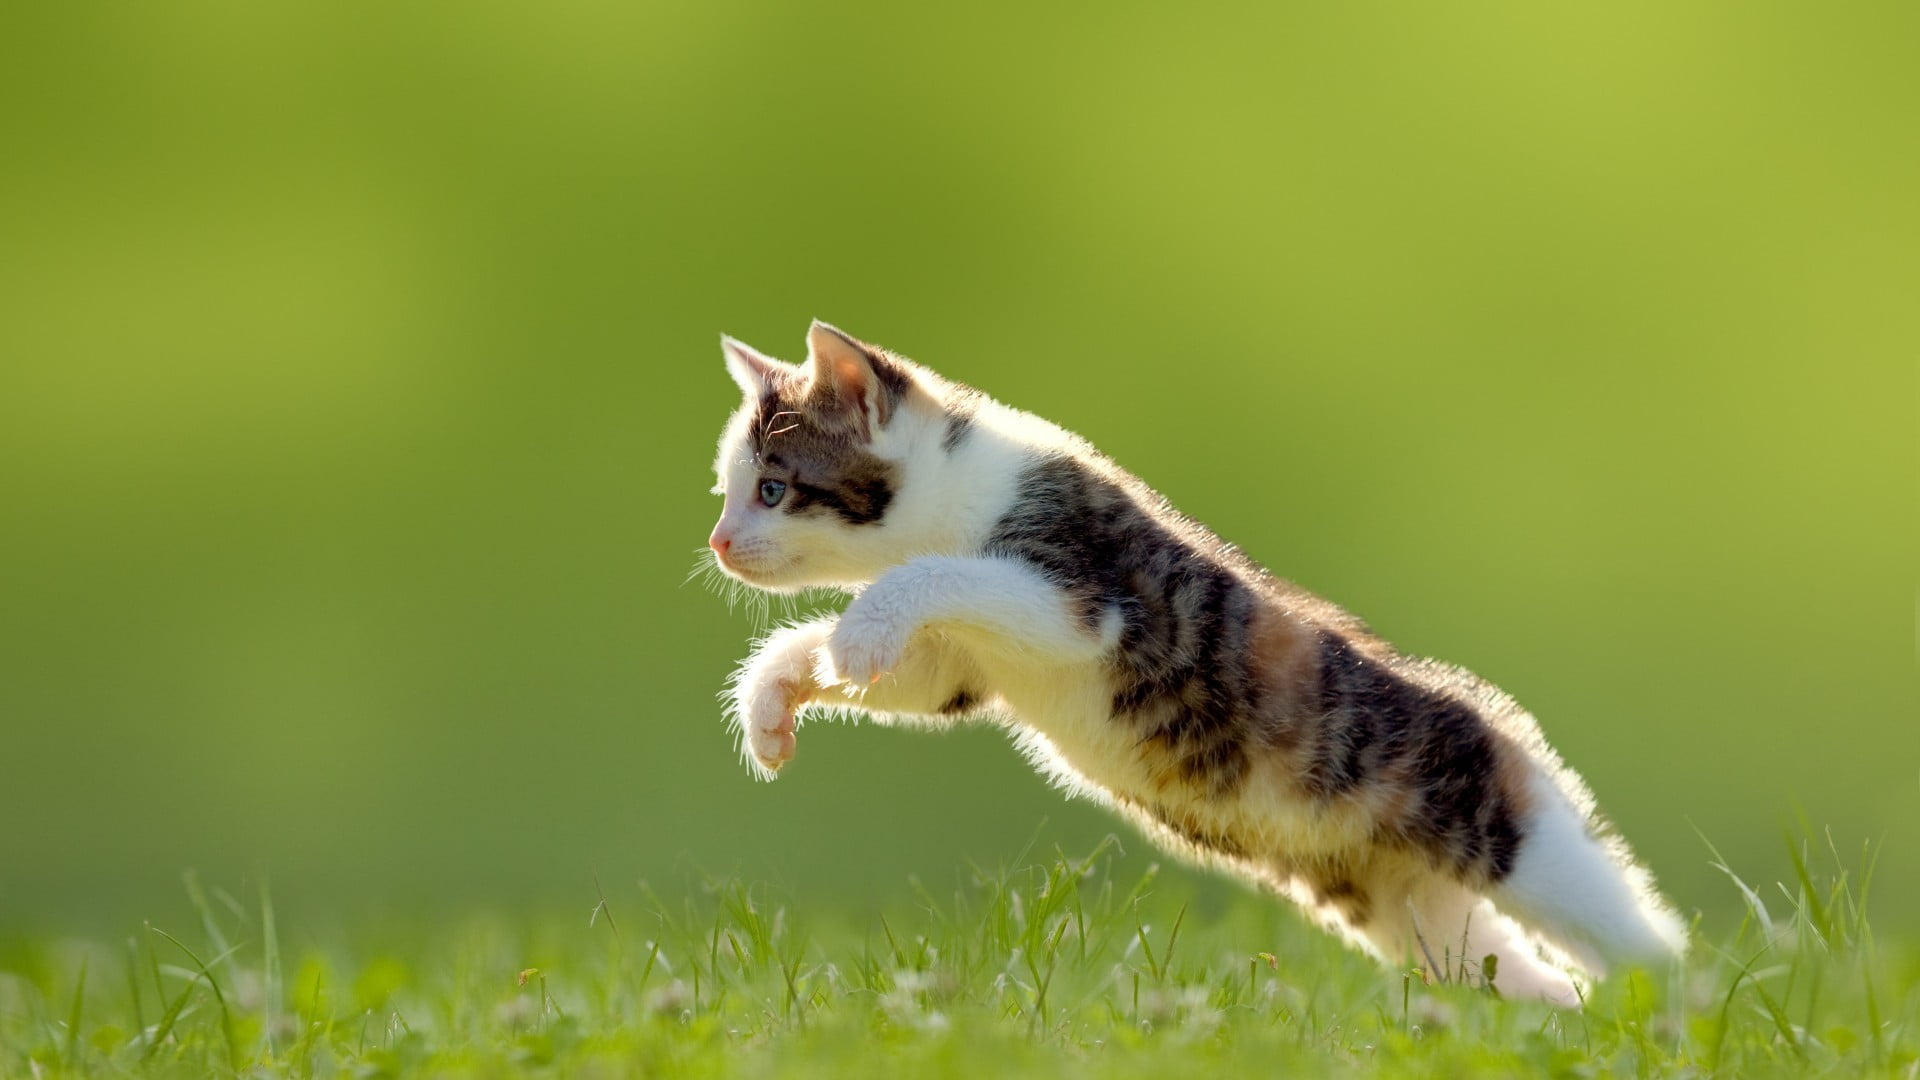 jumping cat over grass, animals, green background, one animal